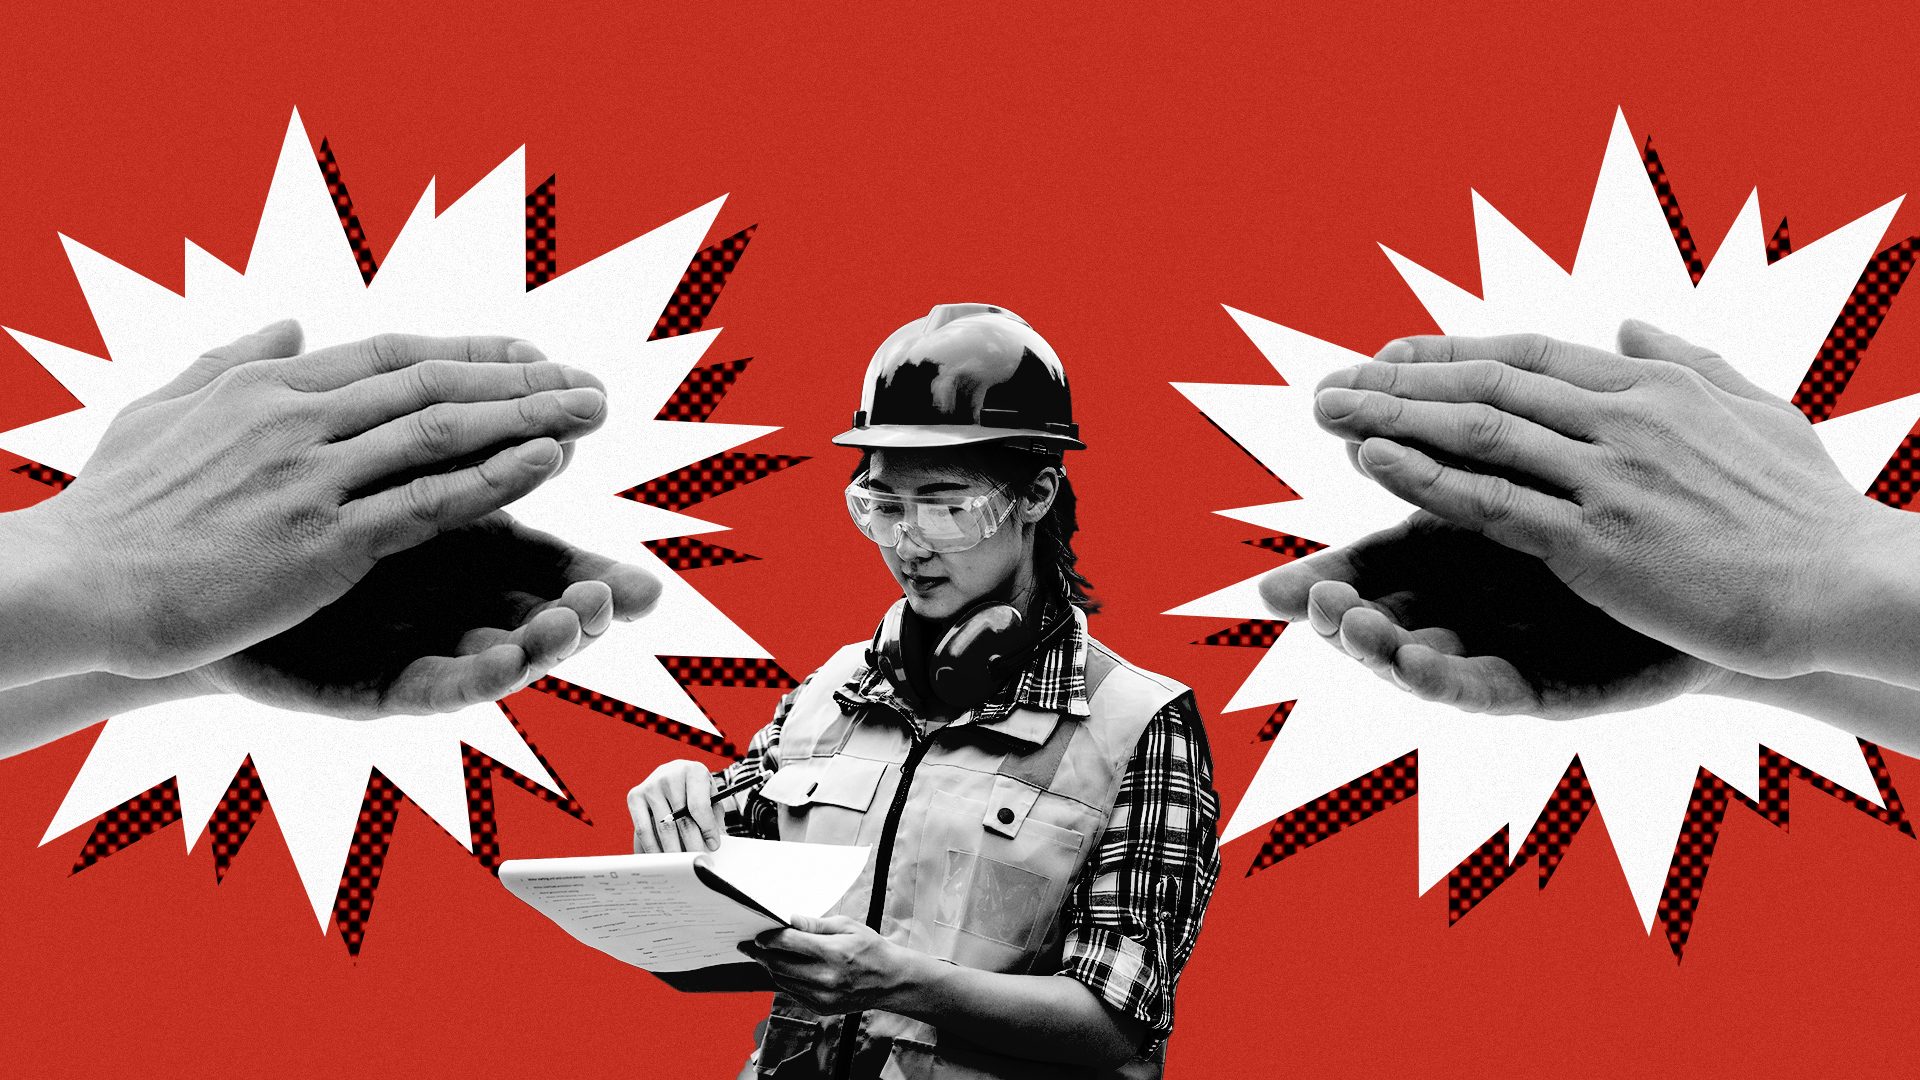 [FIRST PERSON] How I overcame gender discrimination in my construction job